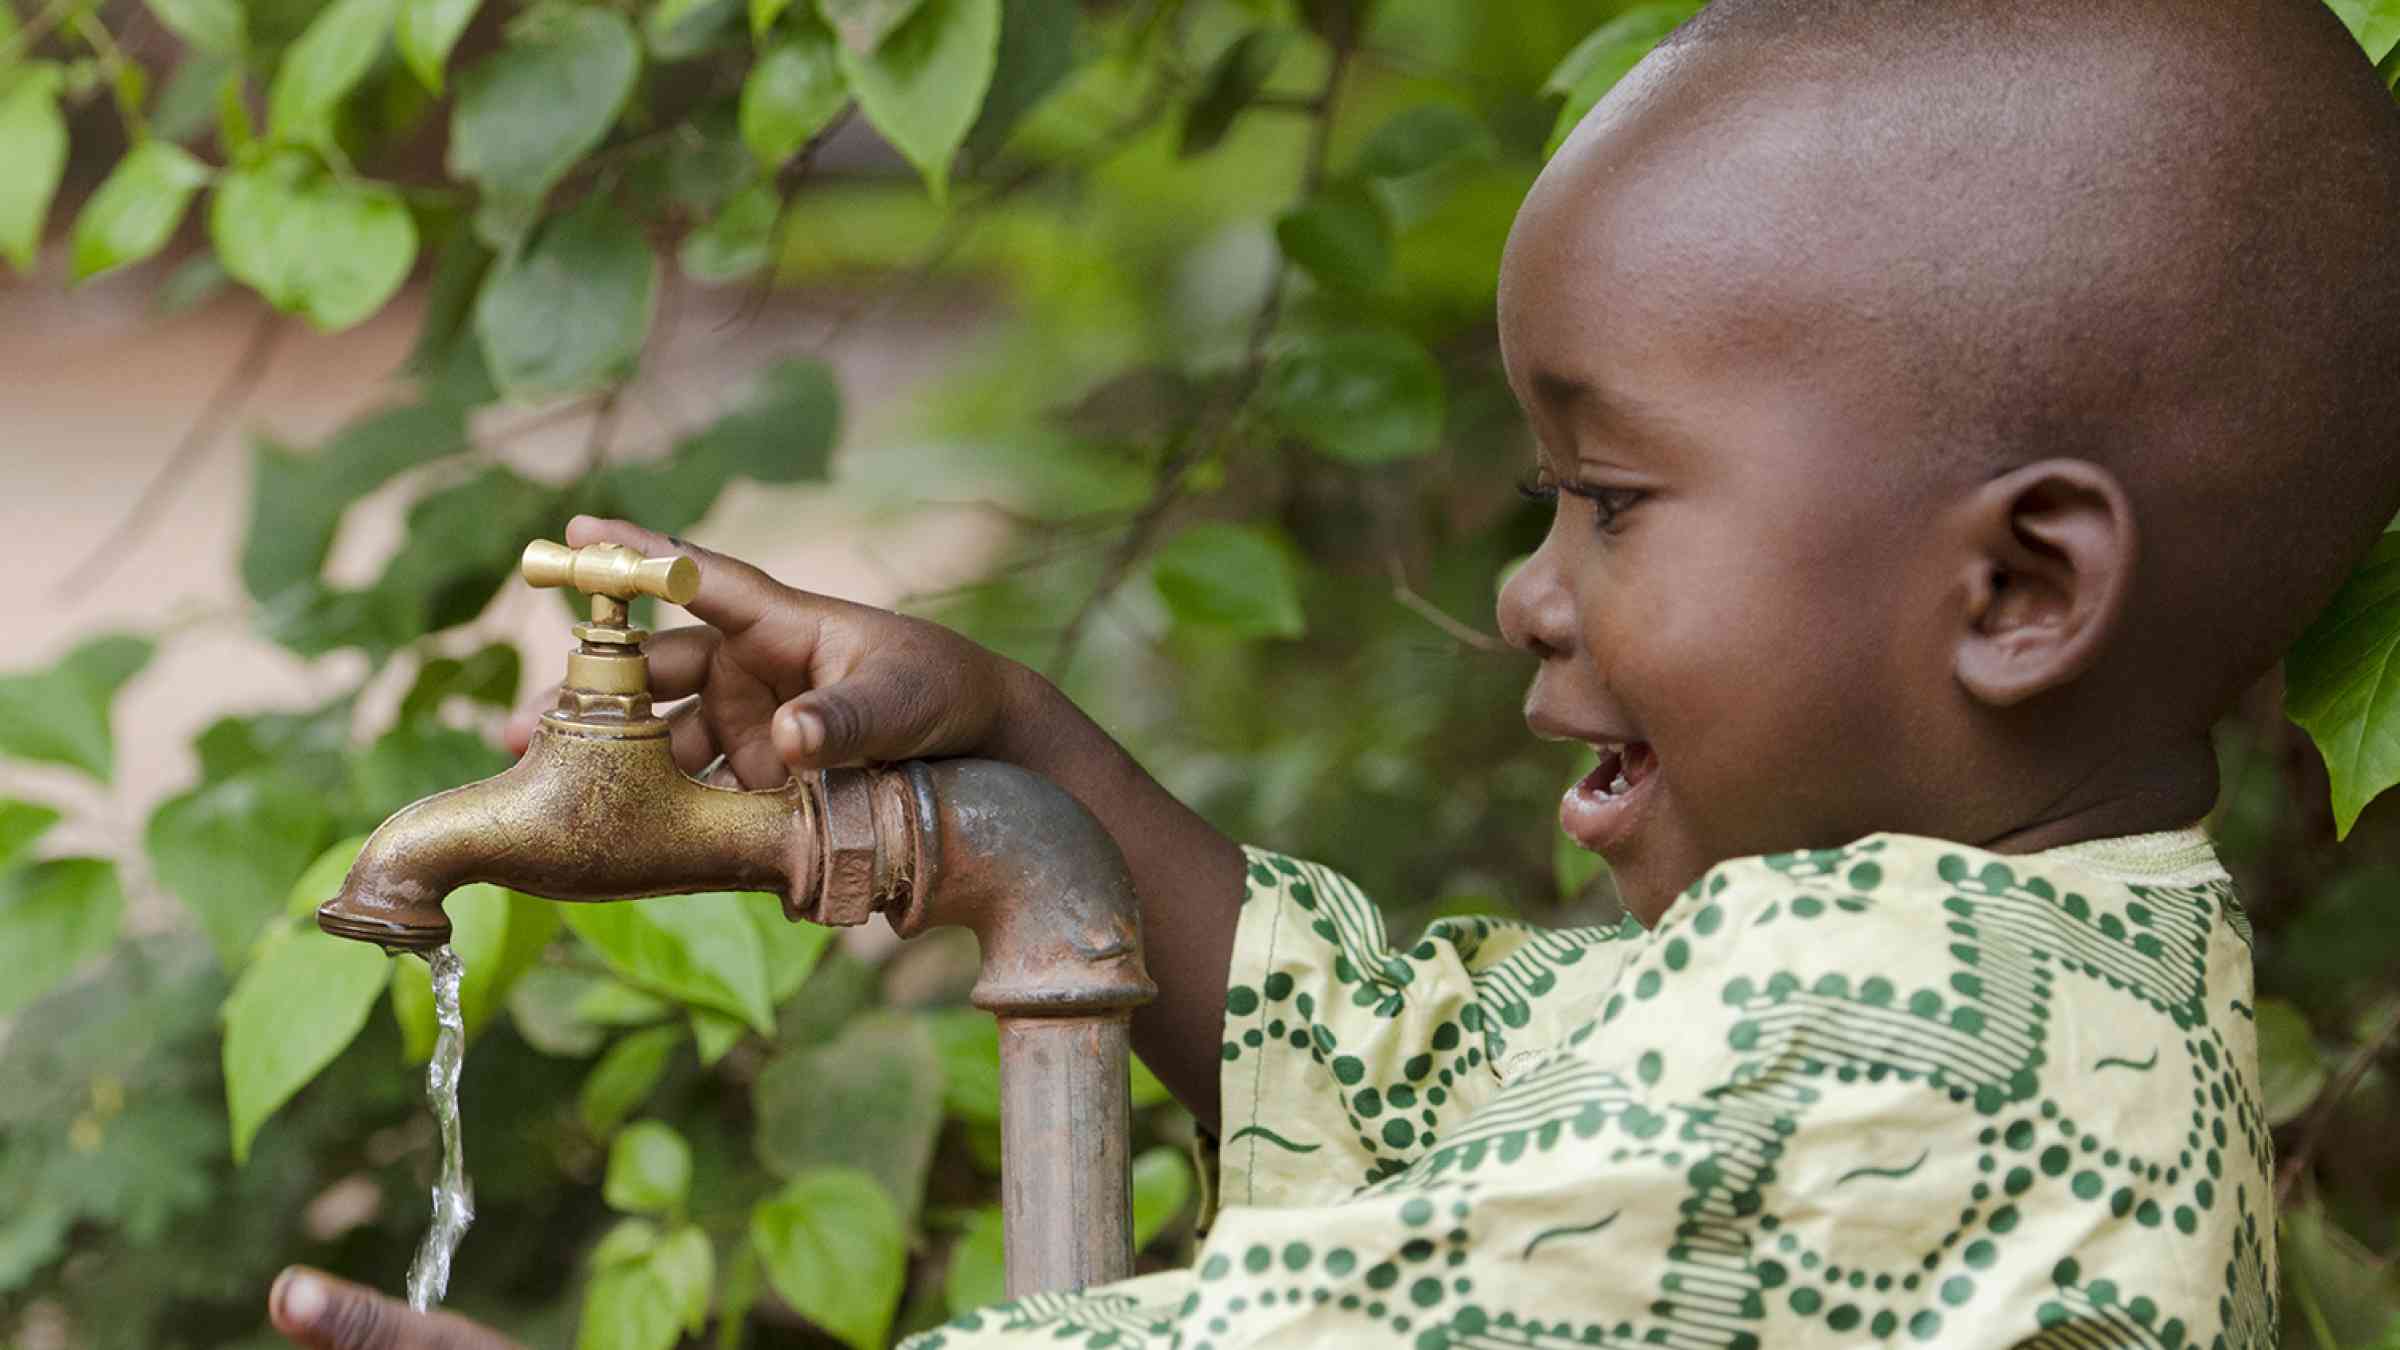 Water scarcity problems concern the inadequate access to safe drinking water.